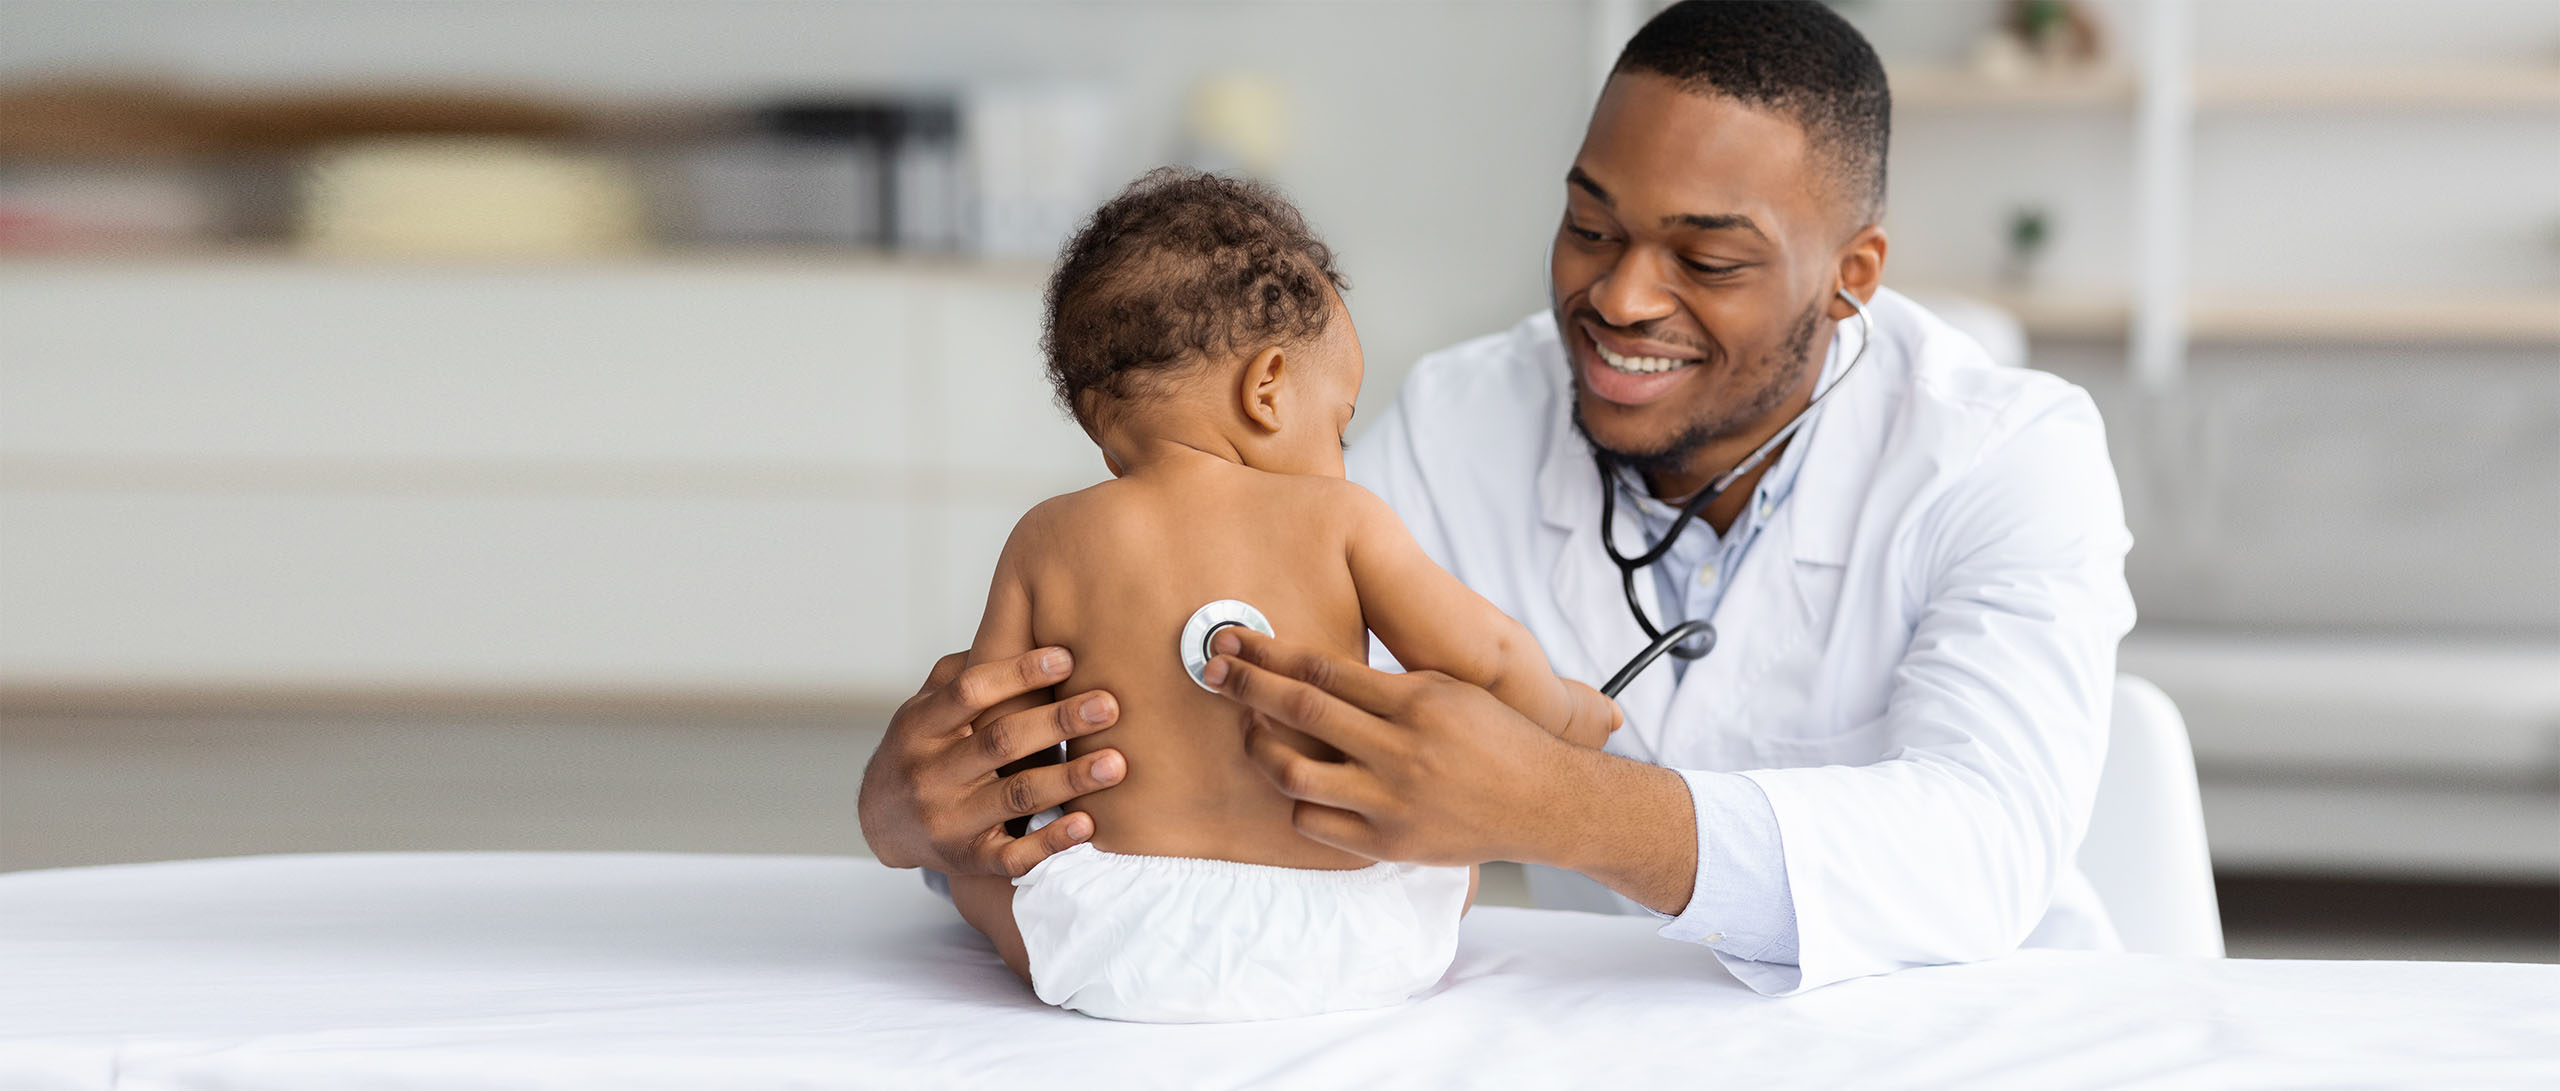 Portrait Of Handsome Black Pediatrician Examining Baby Patient With Stethoscope